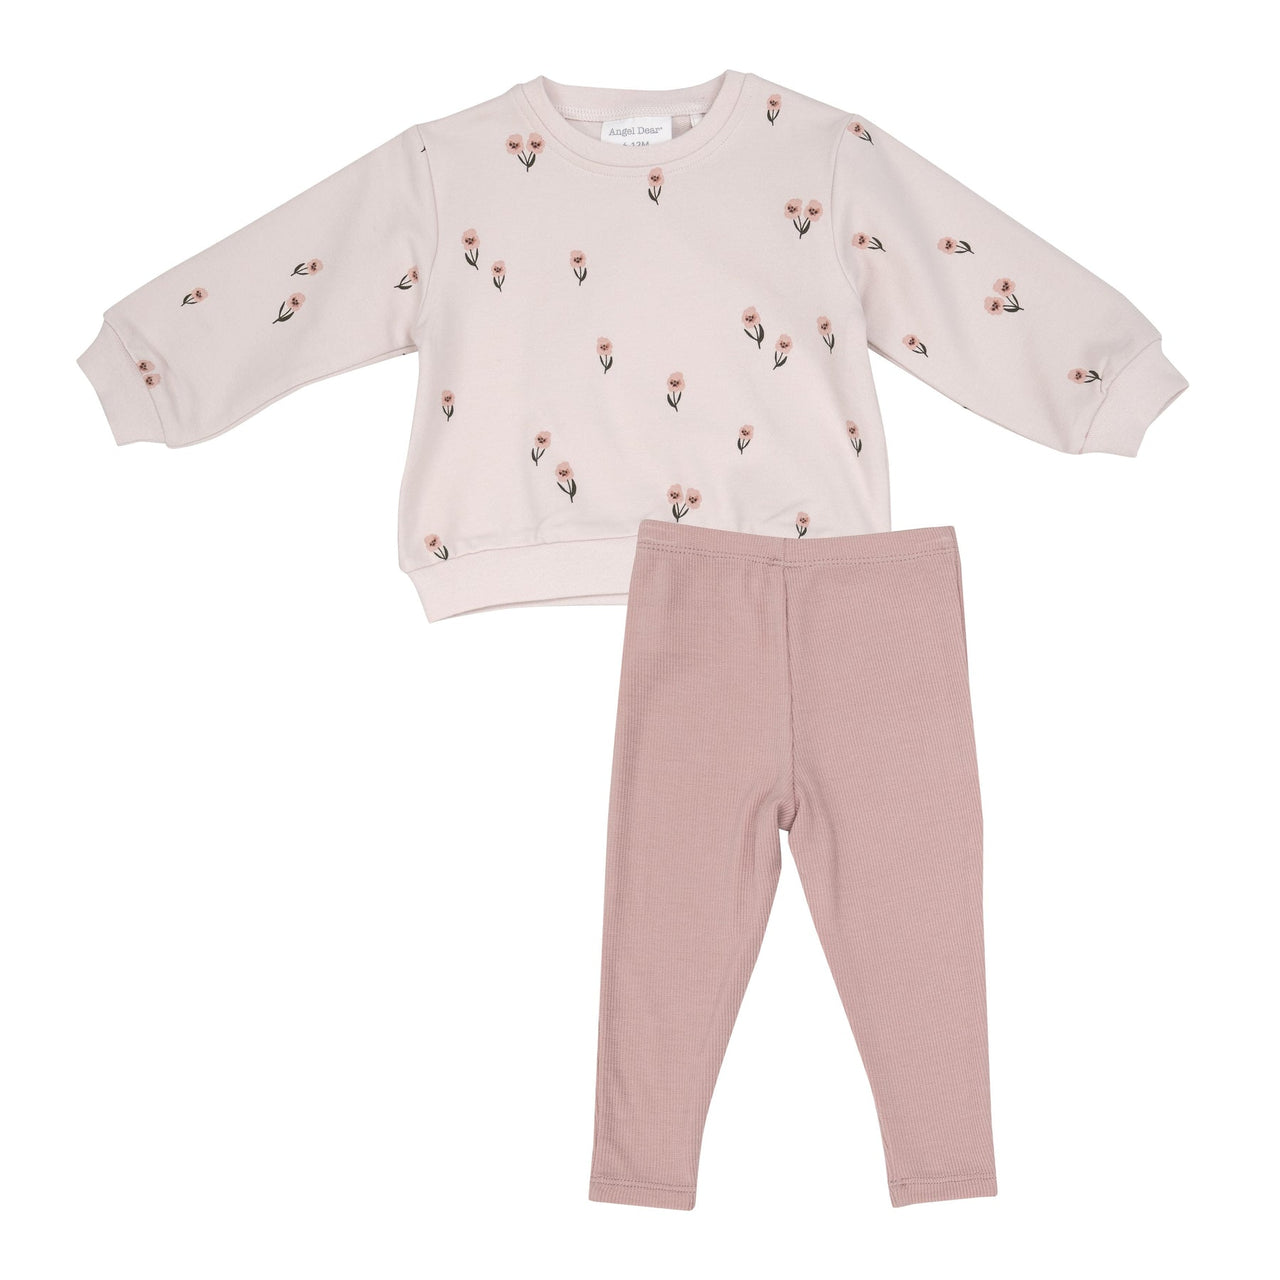 Puffy Oversized Sweatershirt and Rib Legging | Pretty Pink Floral